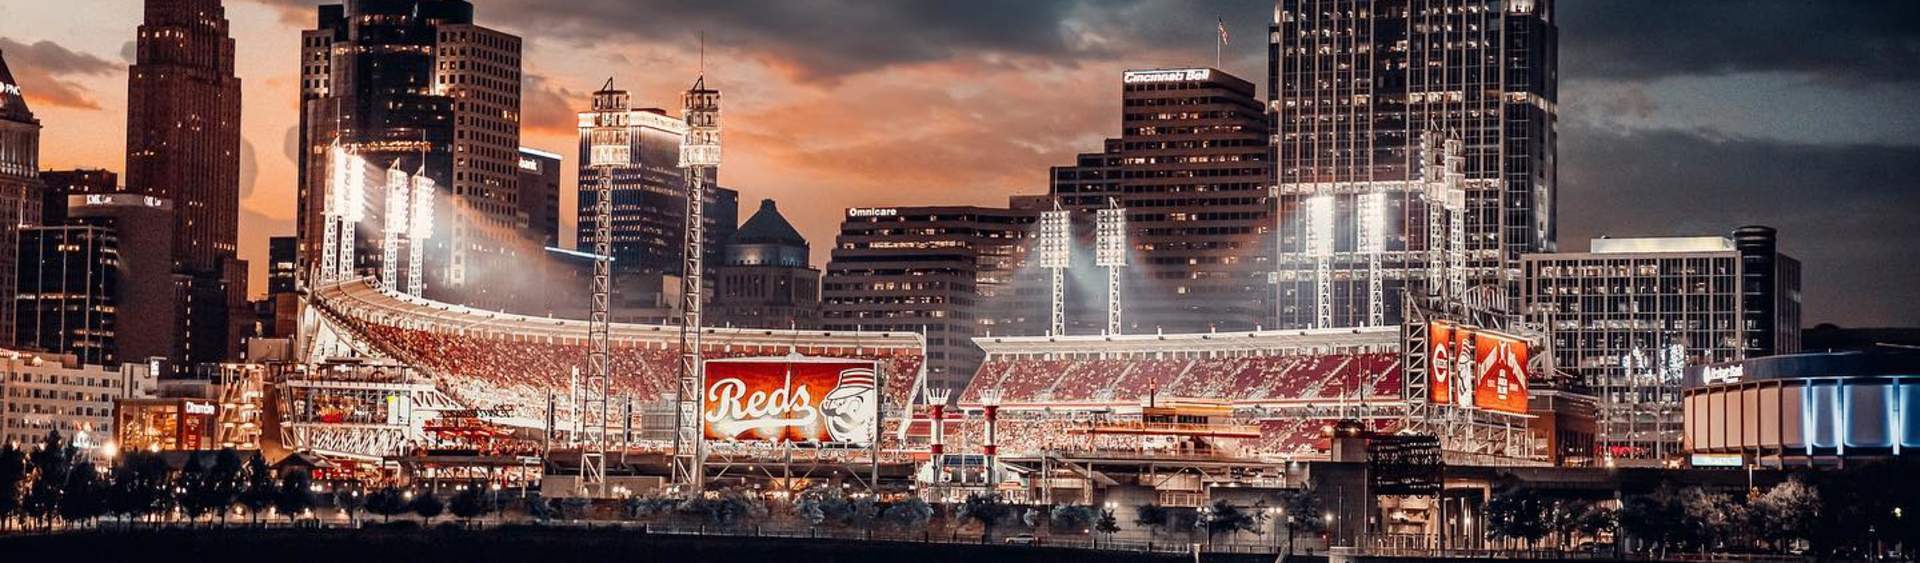 Going To A Game At Great American Ball Park (Cincinnati Reds